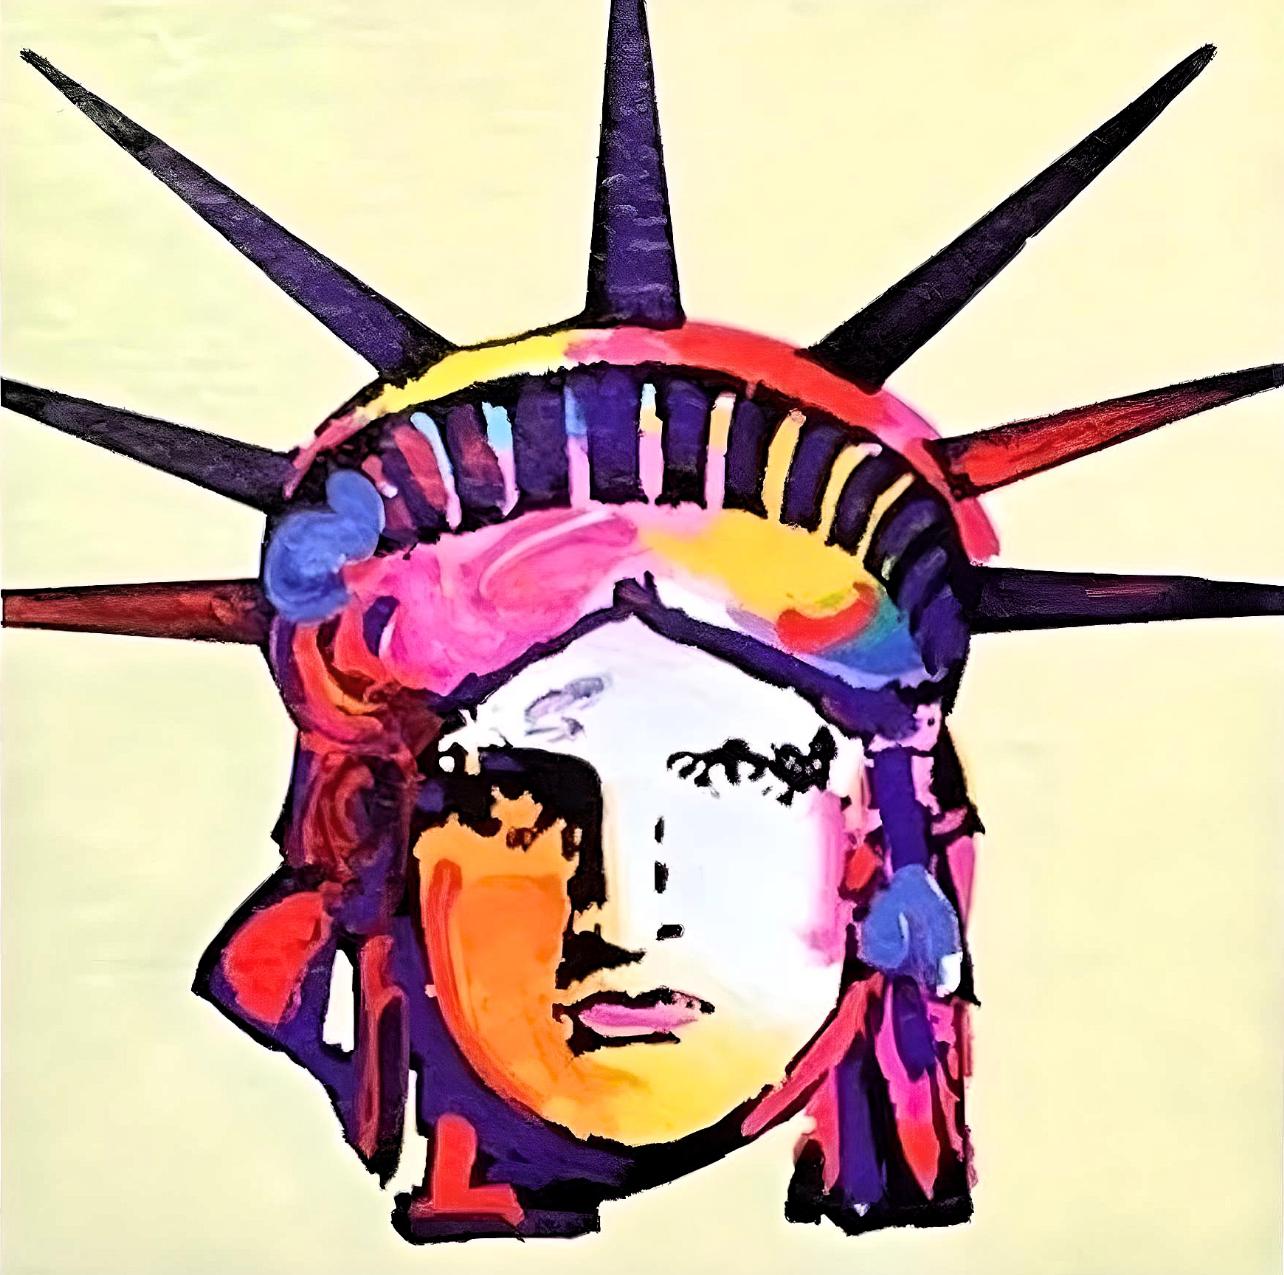 Artist: Peter Max (1937)
Title: Liberty Head IX
Year: 2003
Edition: 491/500, plus proofs
Medium: Lithograph on Lustro Saxony paper
Size: 3.43 x 2.62 inches
Condition: Excellent
Inscription: Signed and numbered by the artist.
Notes: Published by Via